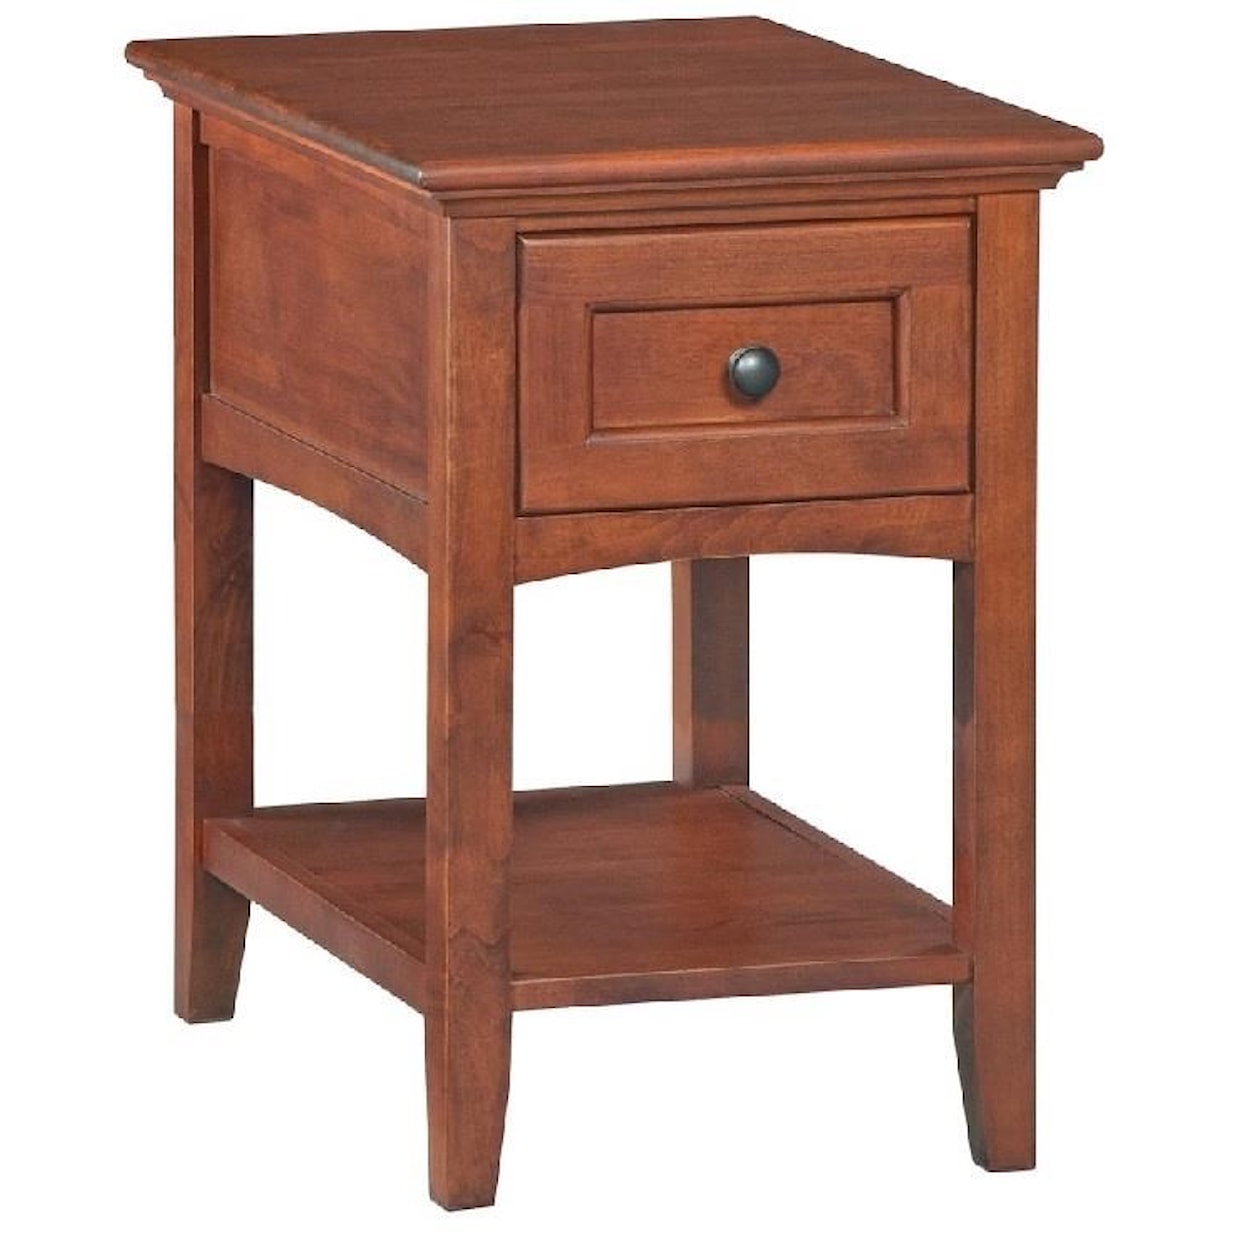 Whittier Wood   Chairside End Table